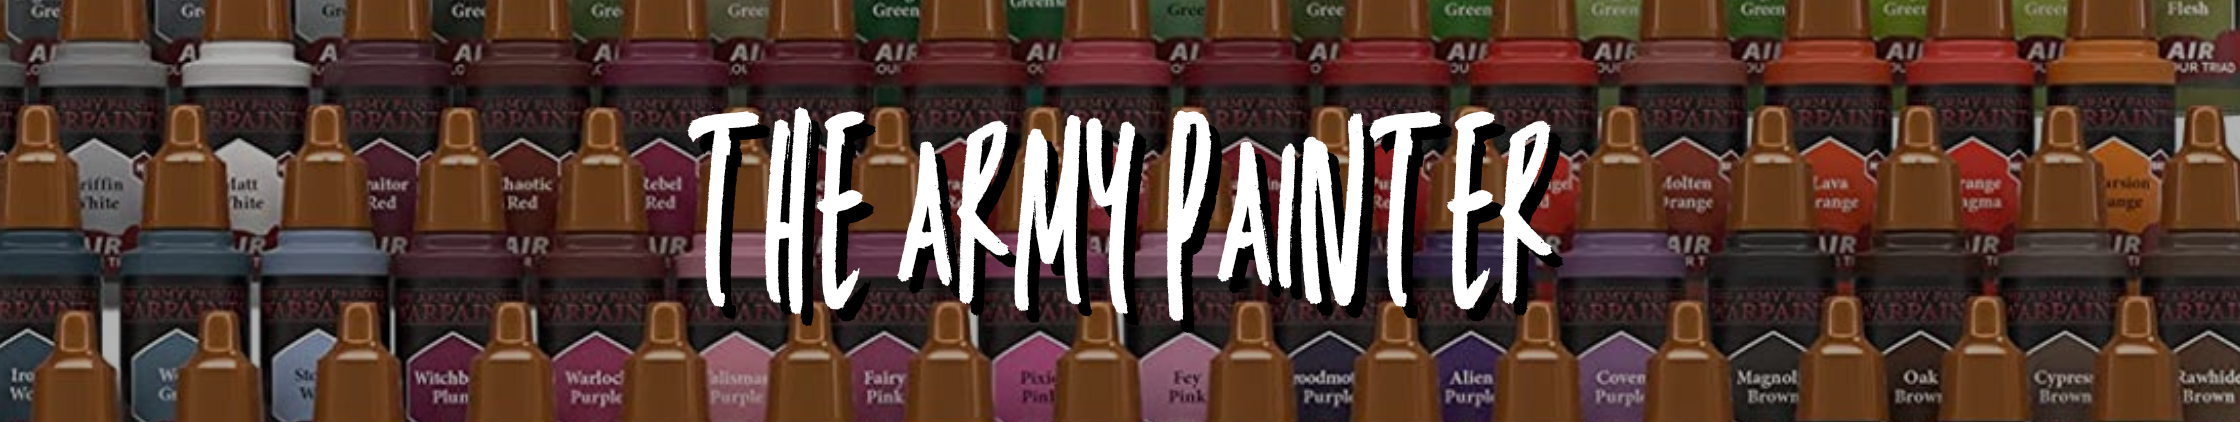 The Army Painter Bottles